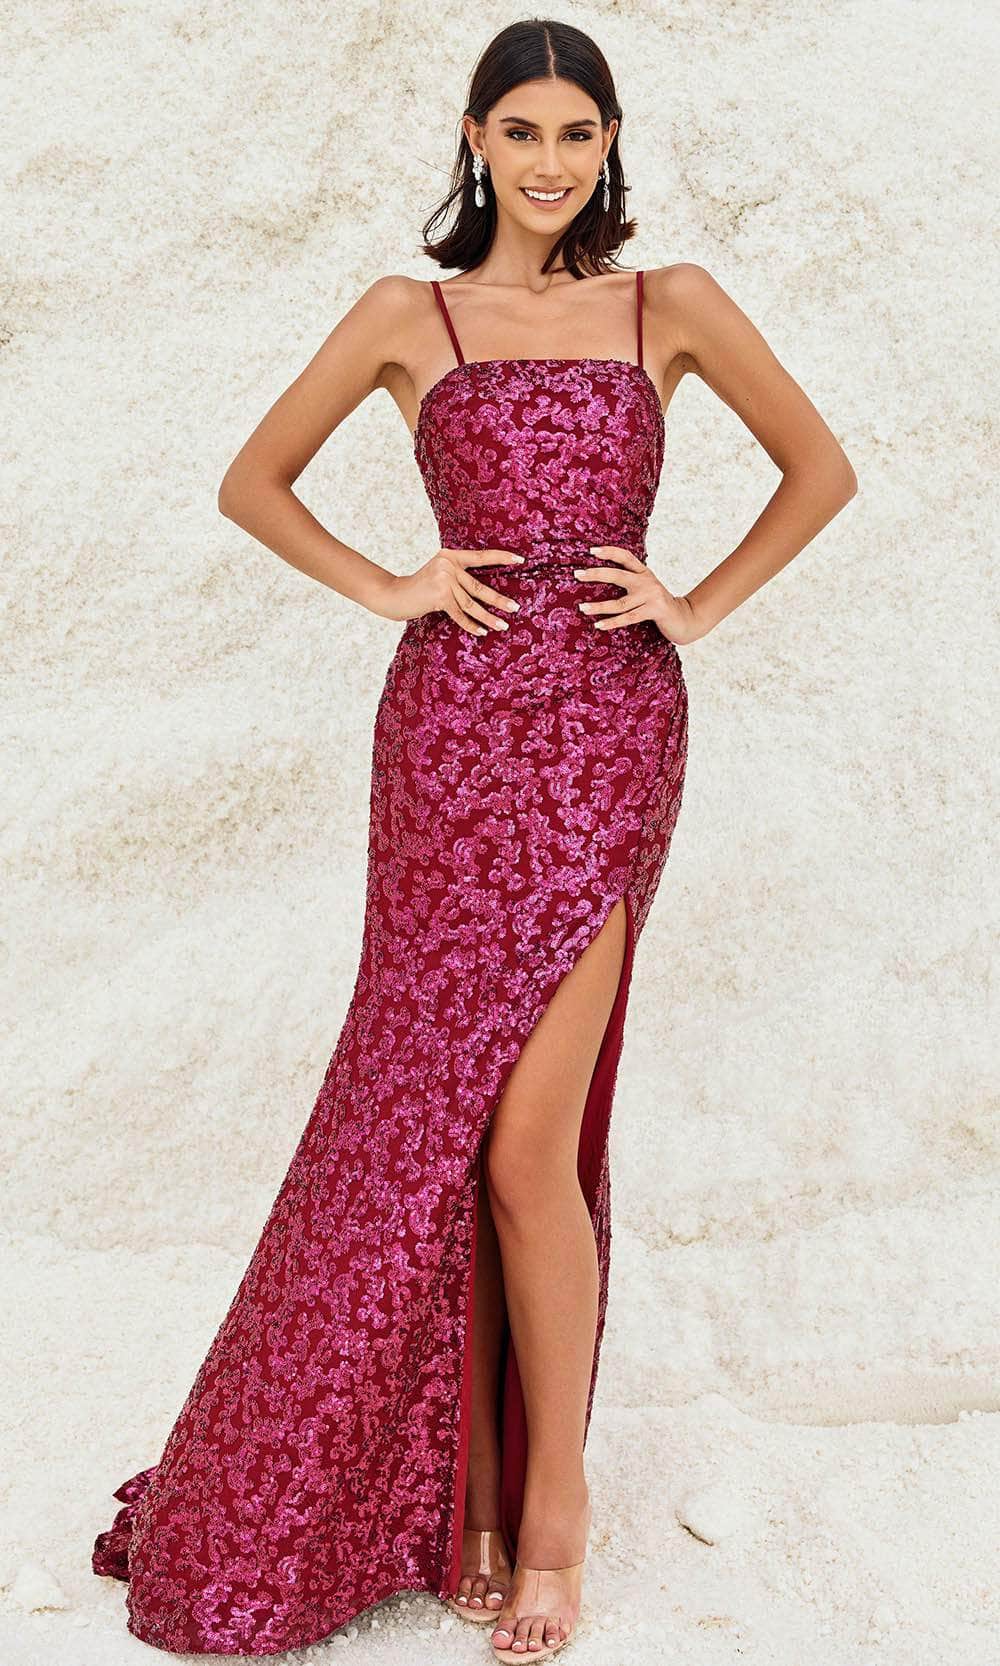 Blush by Alexia Designs 12165 - Sequined Strappy Back Prom Gown
